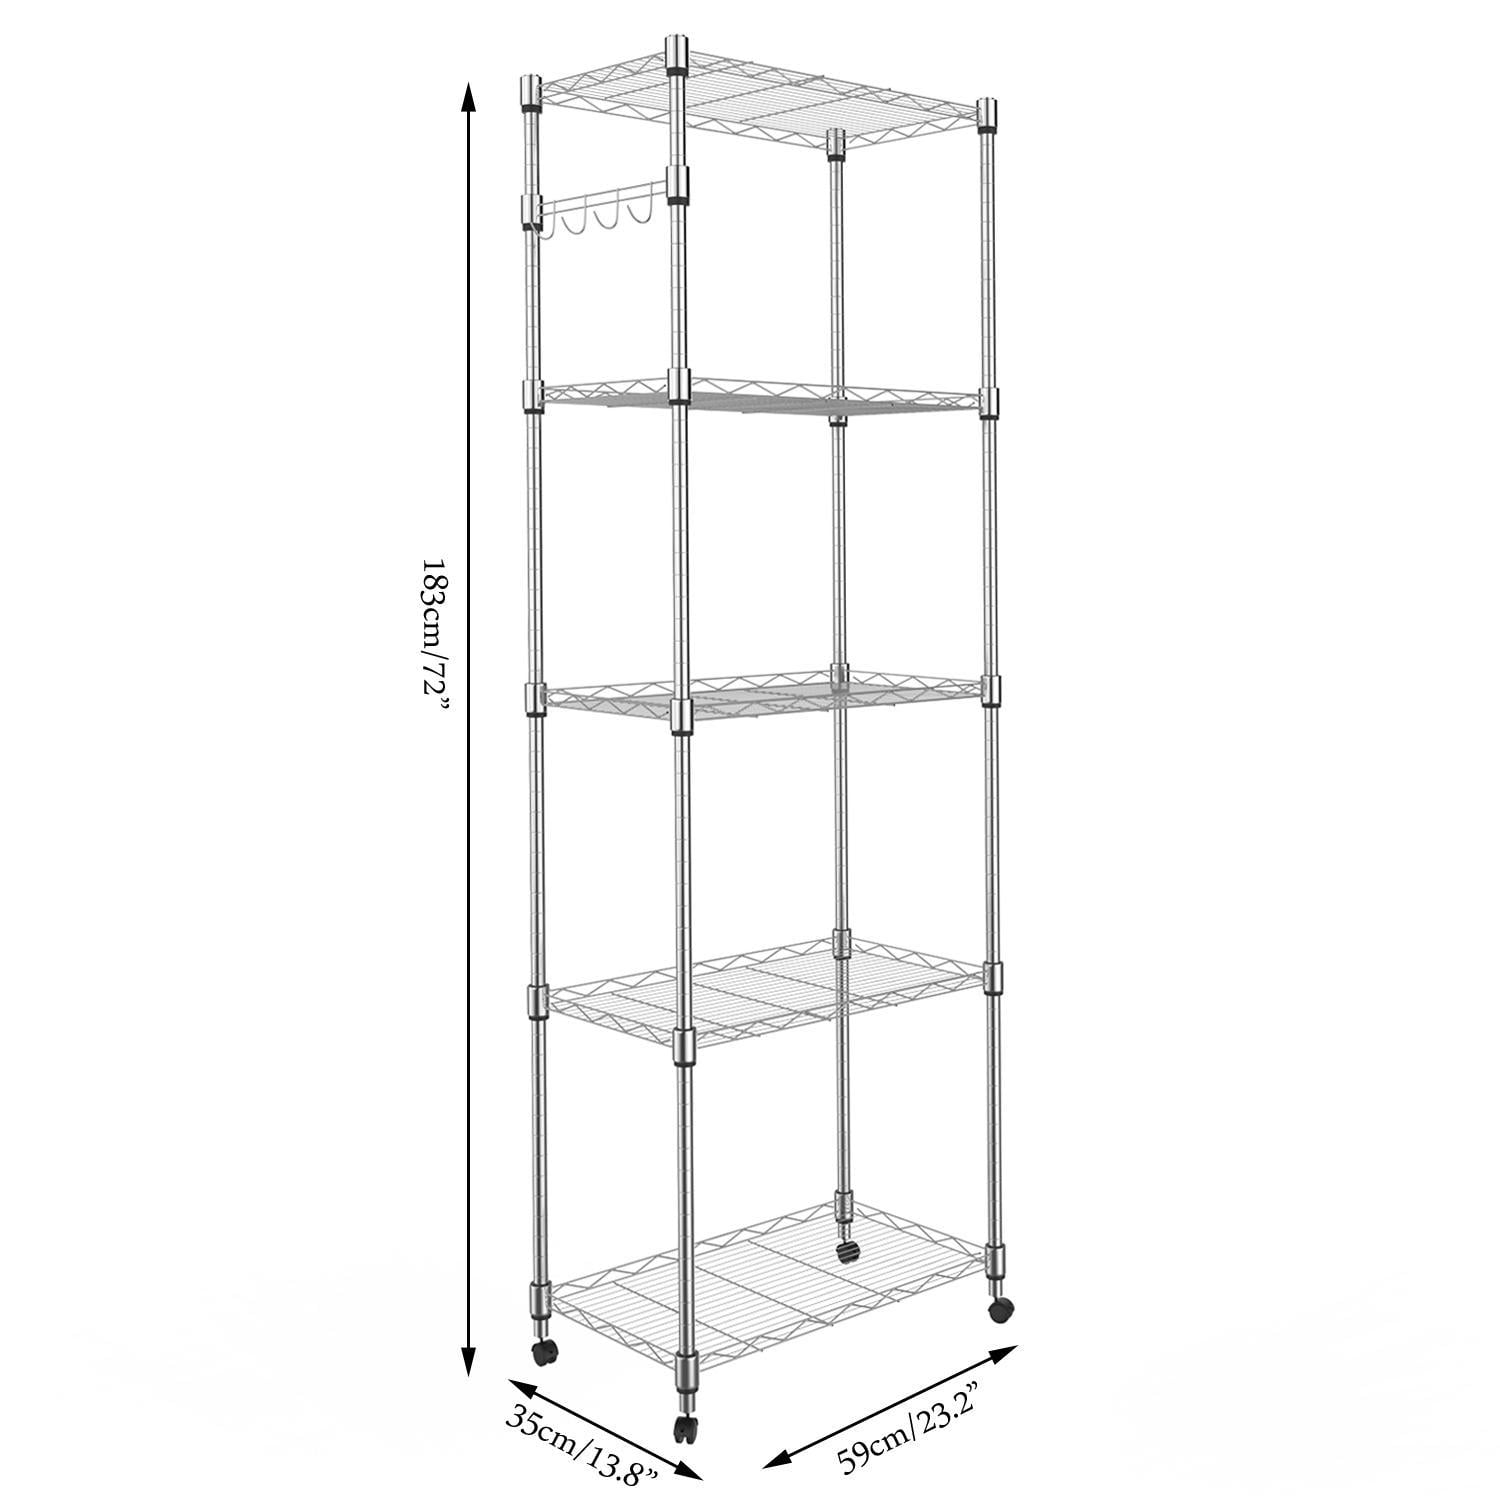 Hot 5 Tier Steel Wire Shelving Rack On, 5 Tier Wire Shelving Rack With Wheels 36 X 18 721